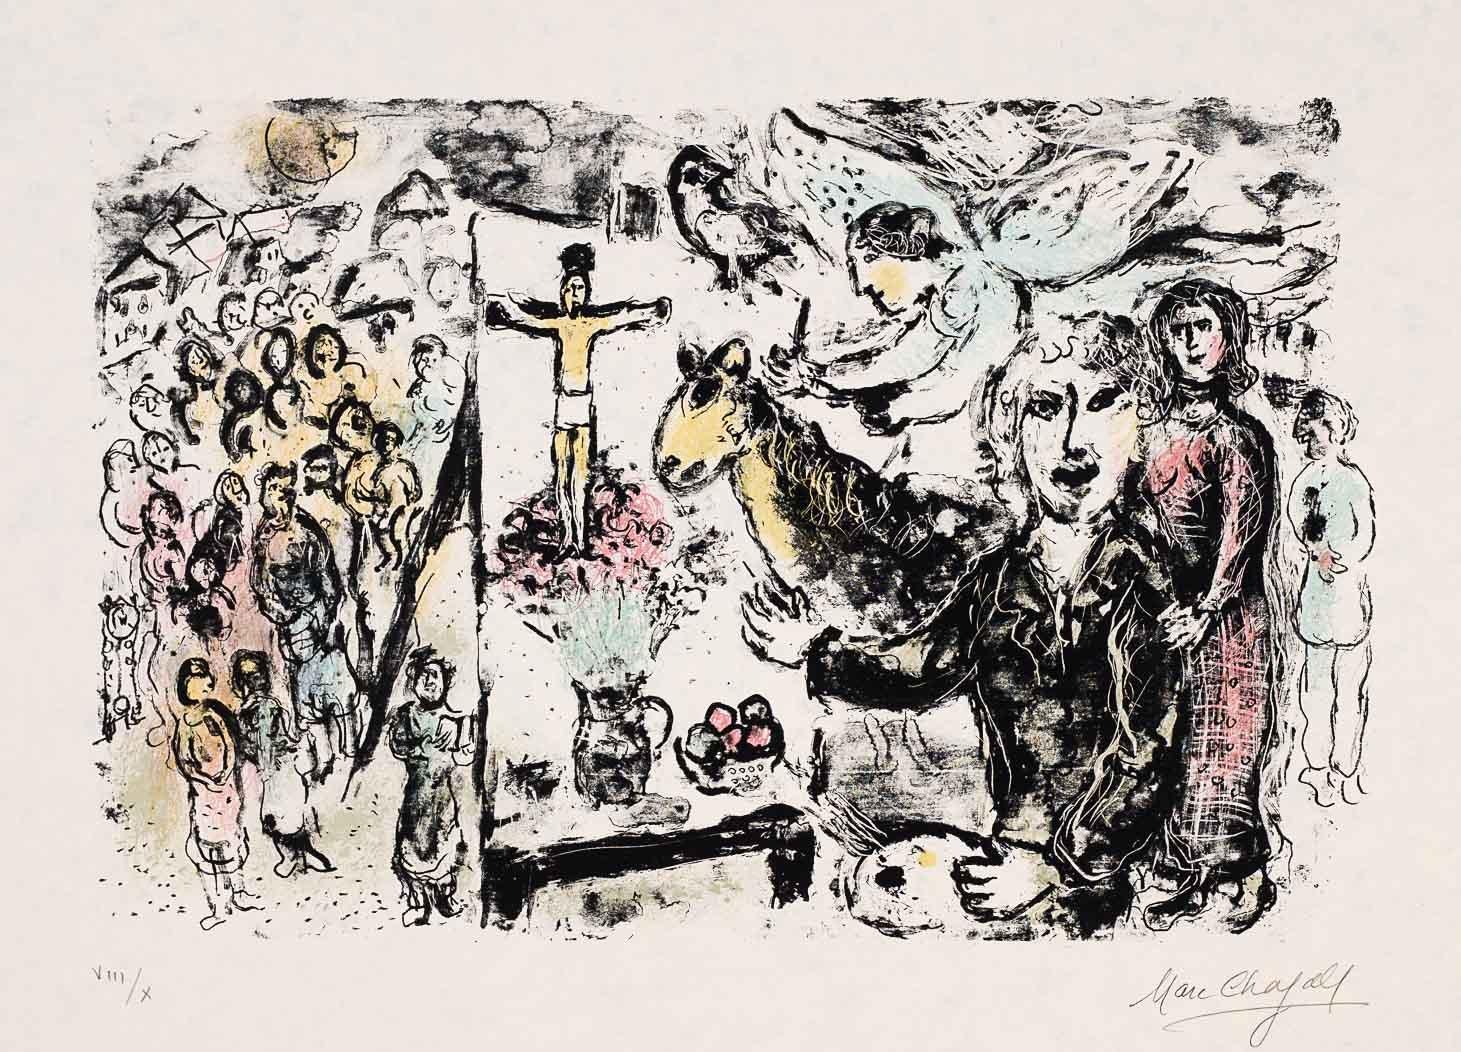 Marc Chagall Figurative Print – The Artist and Biblical Themes, 1974 (M.722)